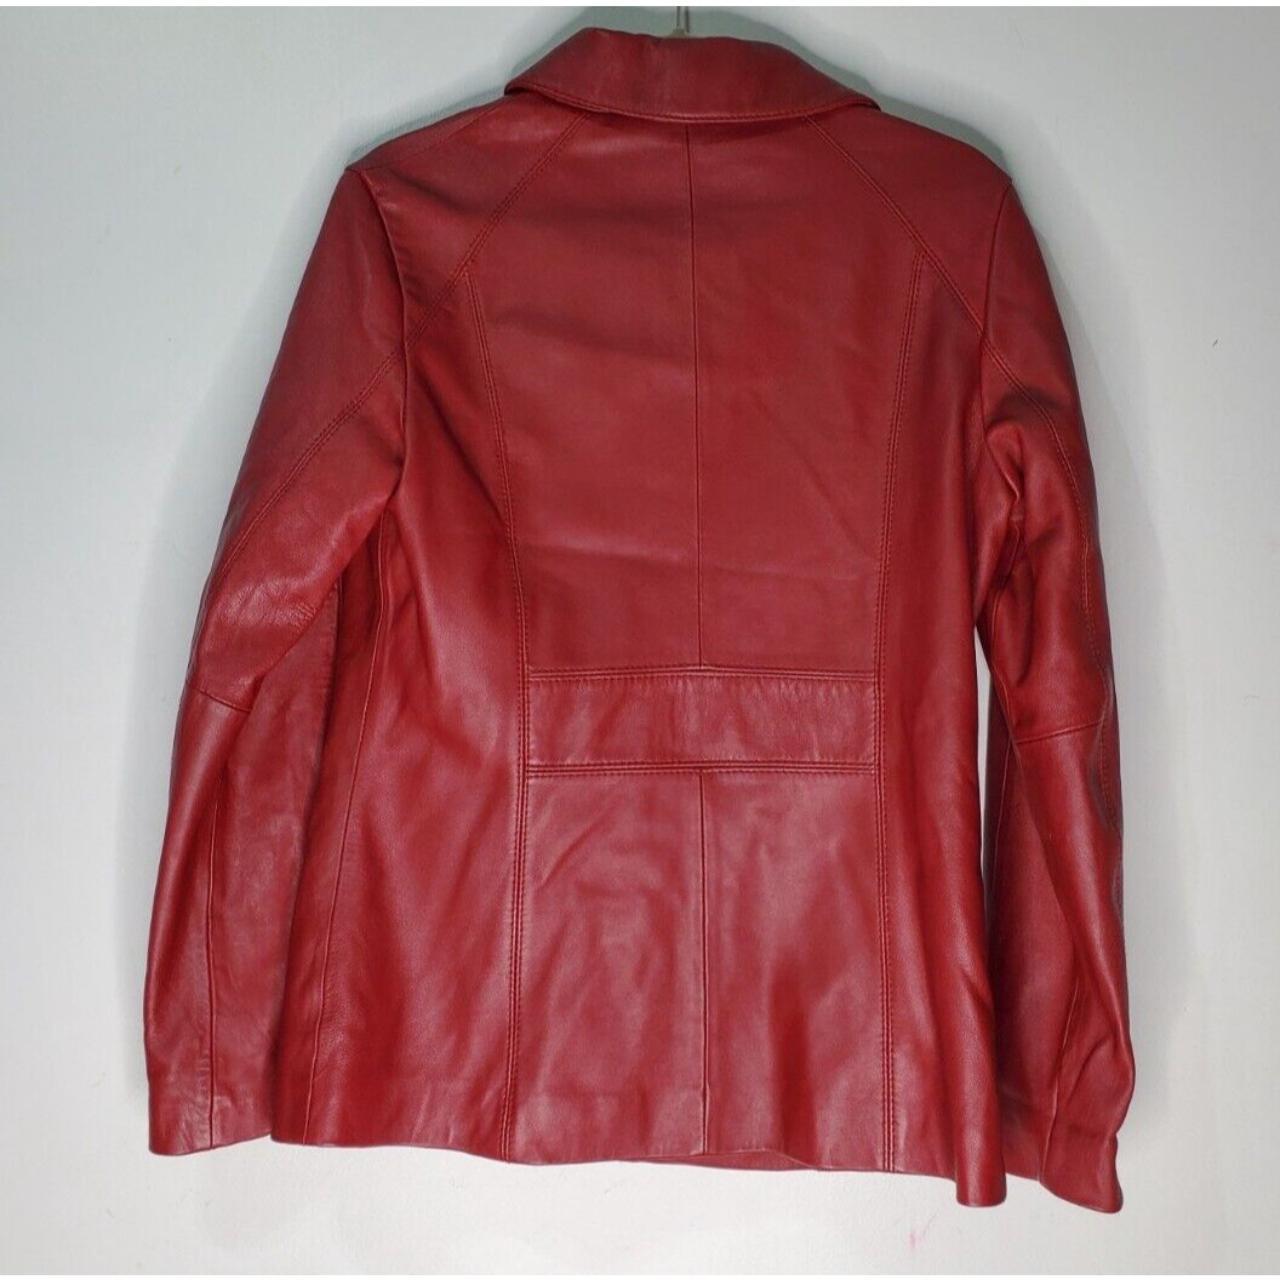 Product Image 3 - In good condition Wilsons Leather